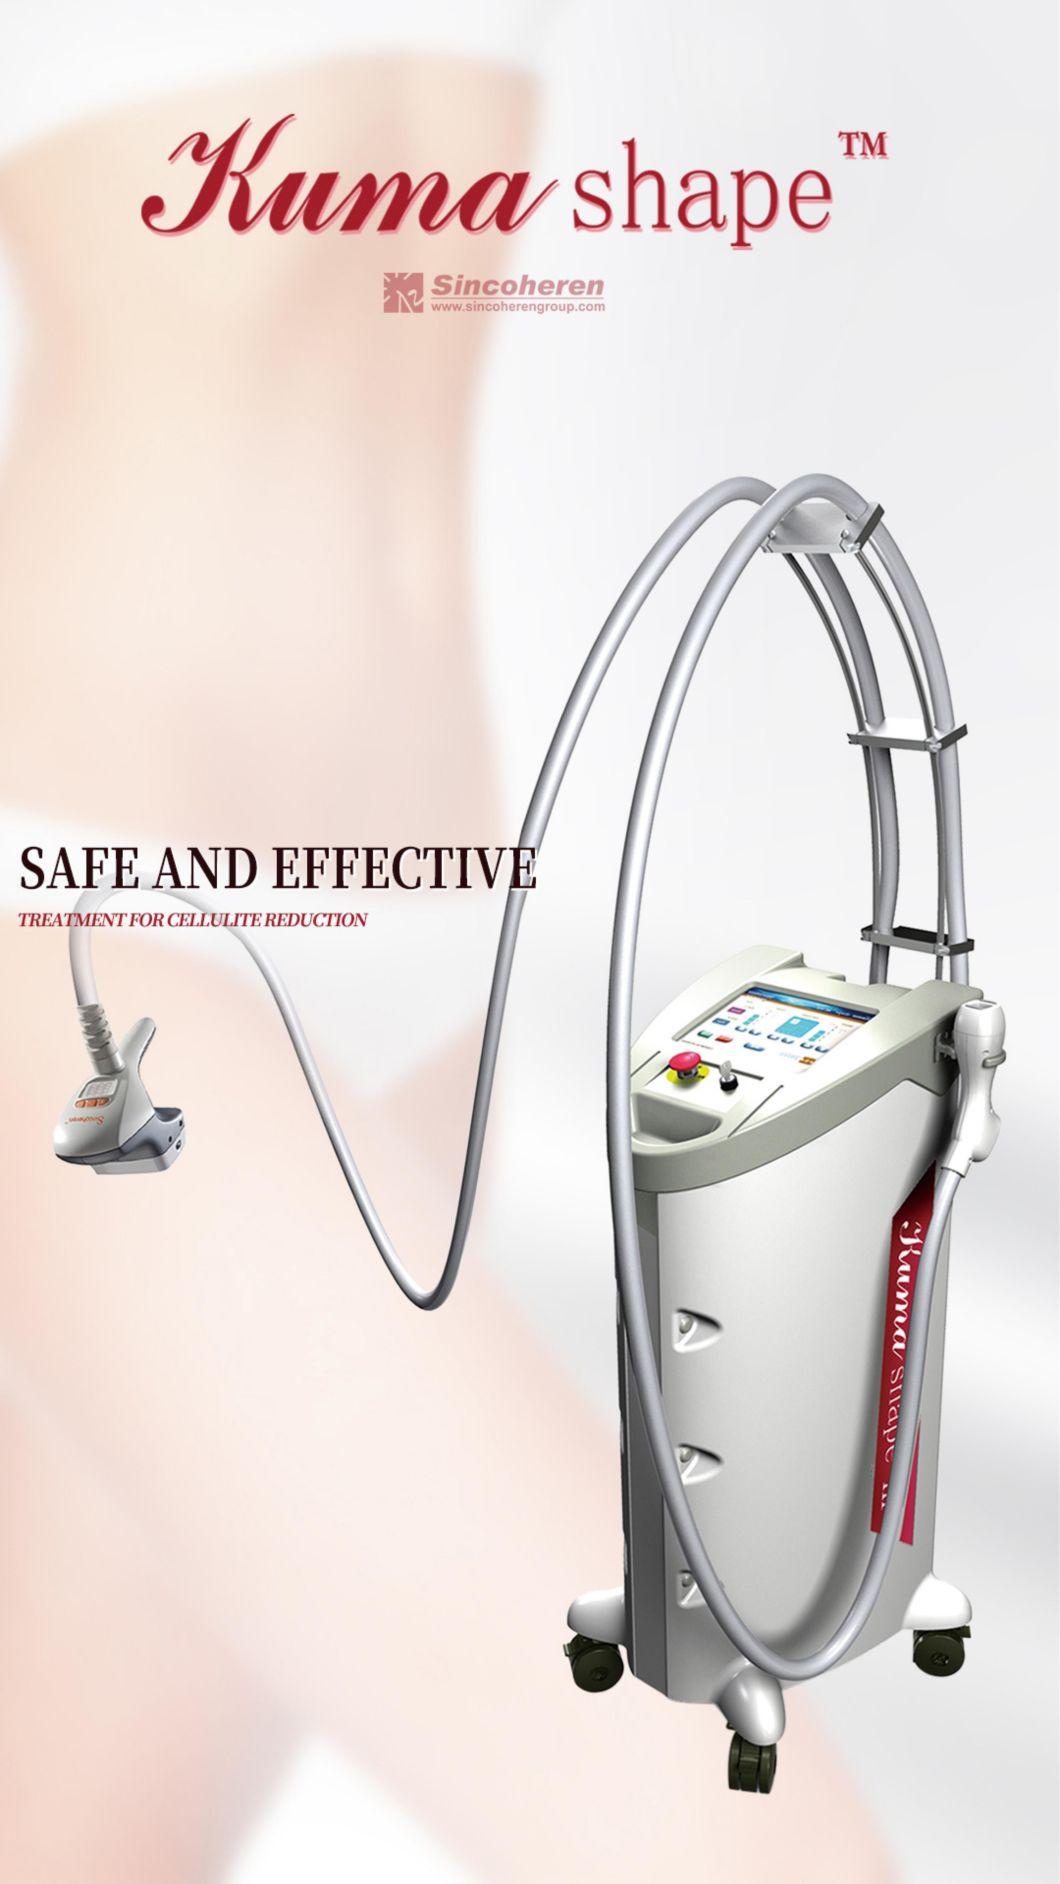 3000W High Energy Bodysculpt Machine Weight Loss Cellulite Removal Body Shaper Fat Burning Factory Price Body Contouring RF Infrared Vacuum Slimming Machine-Xsw